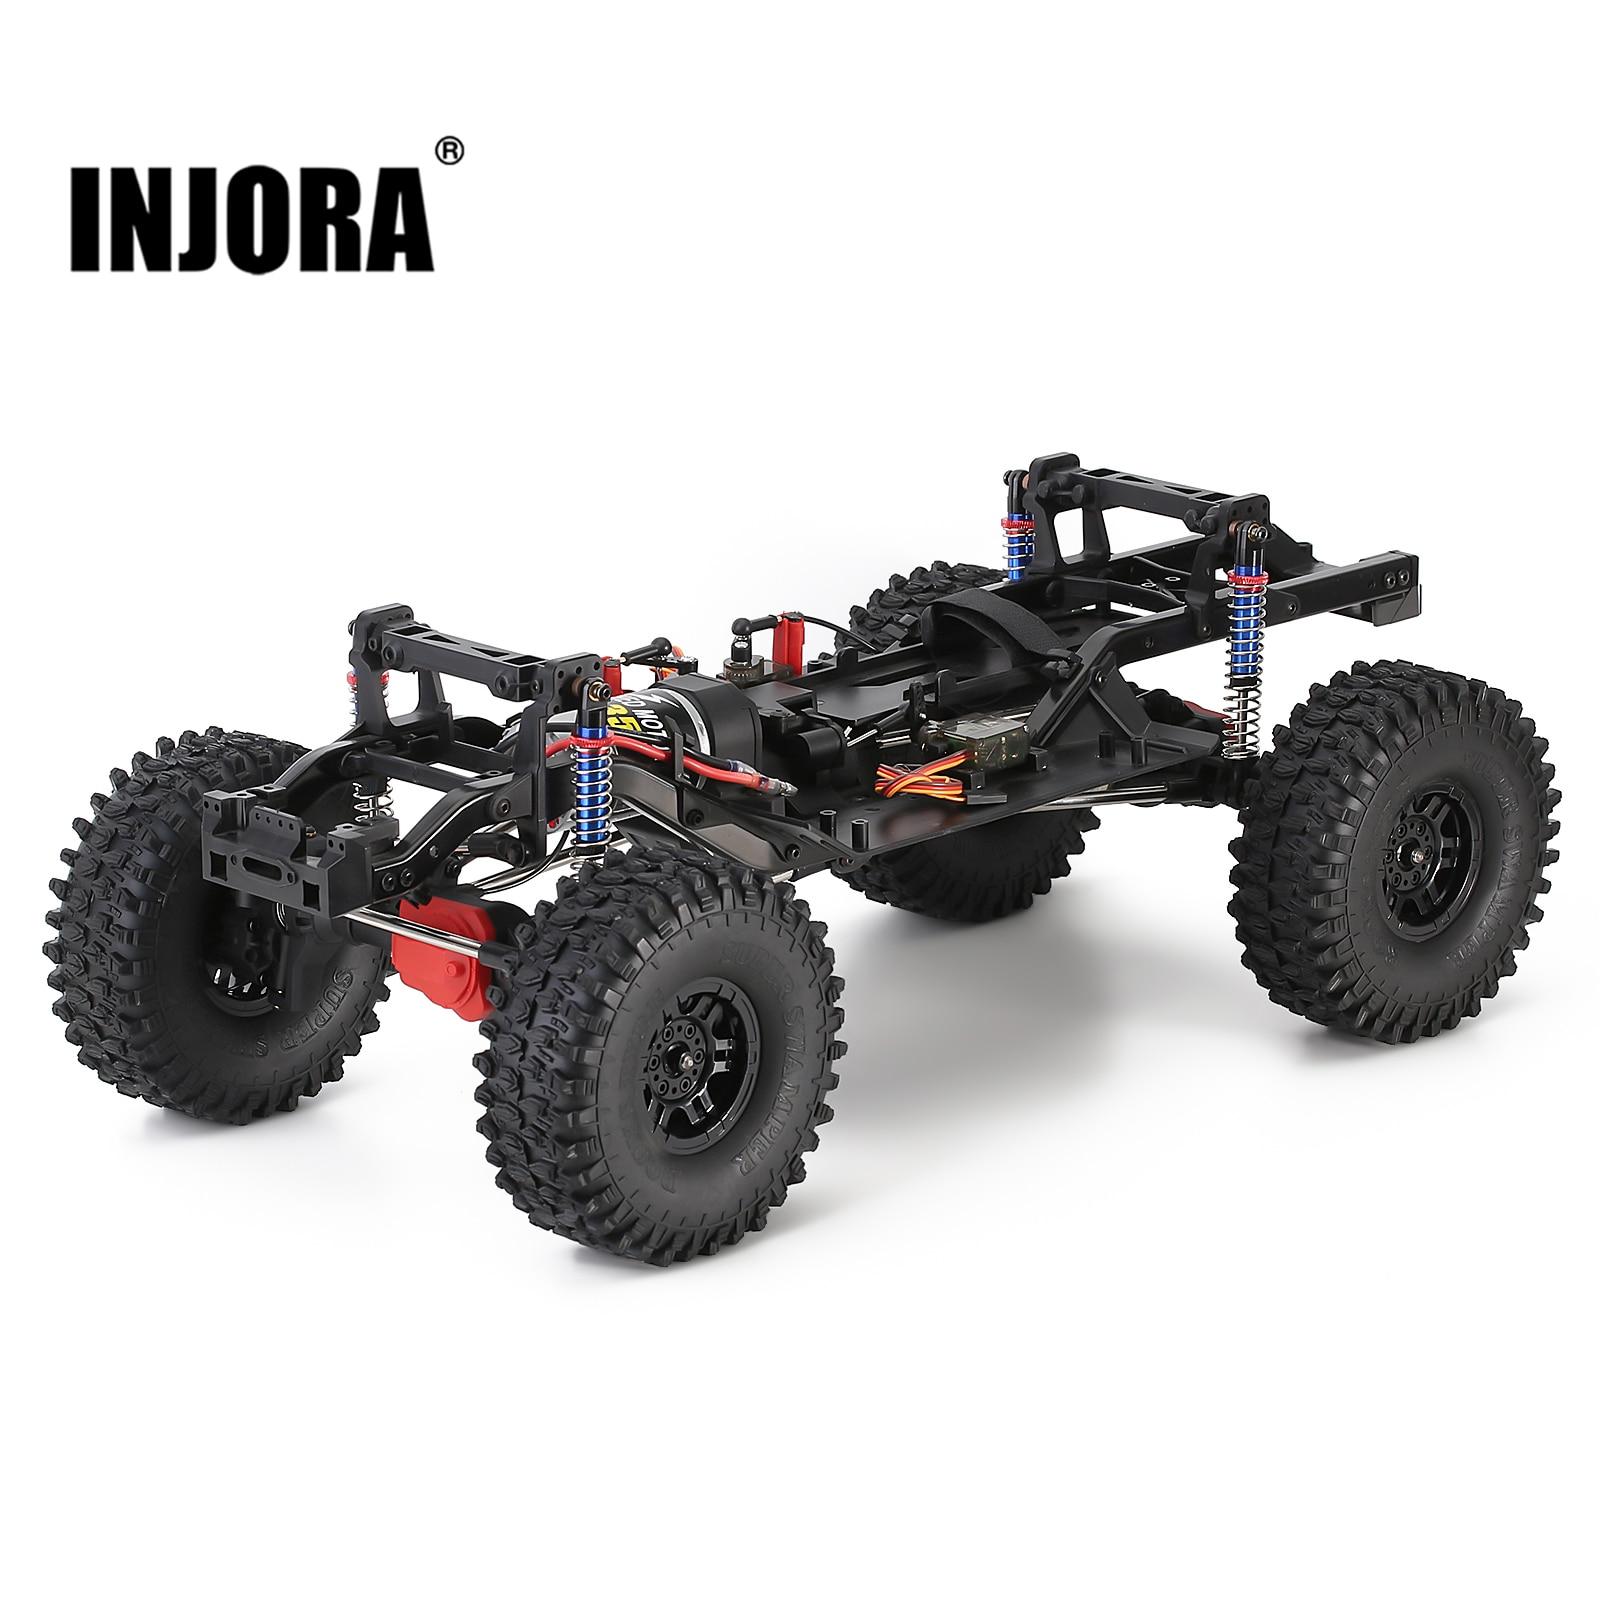 INJORA-2-Speed-Transmission-Chassis-Frame-with-Differential-Portal-Axle-for-1-10-RC-Crawler-Car.jpg